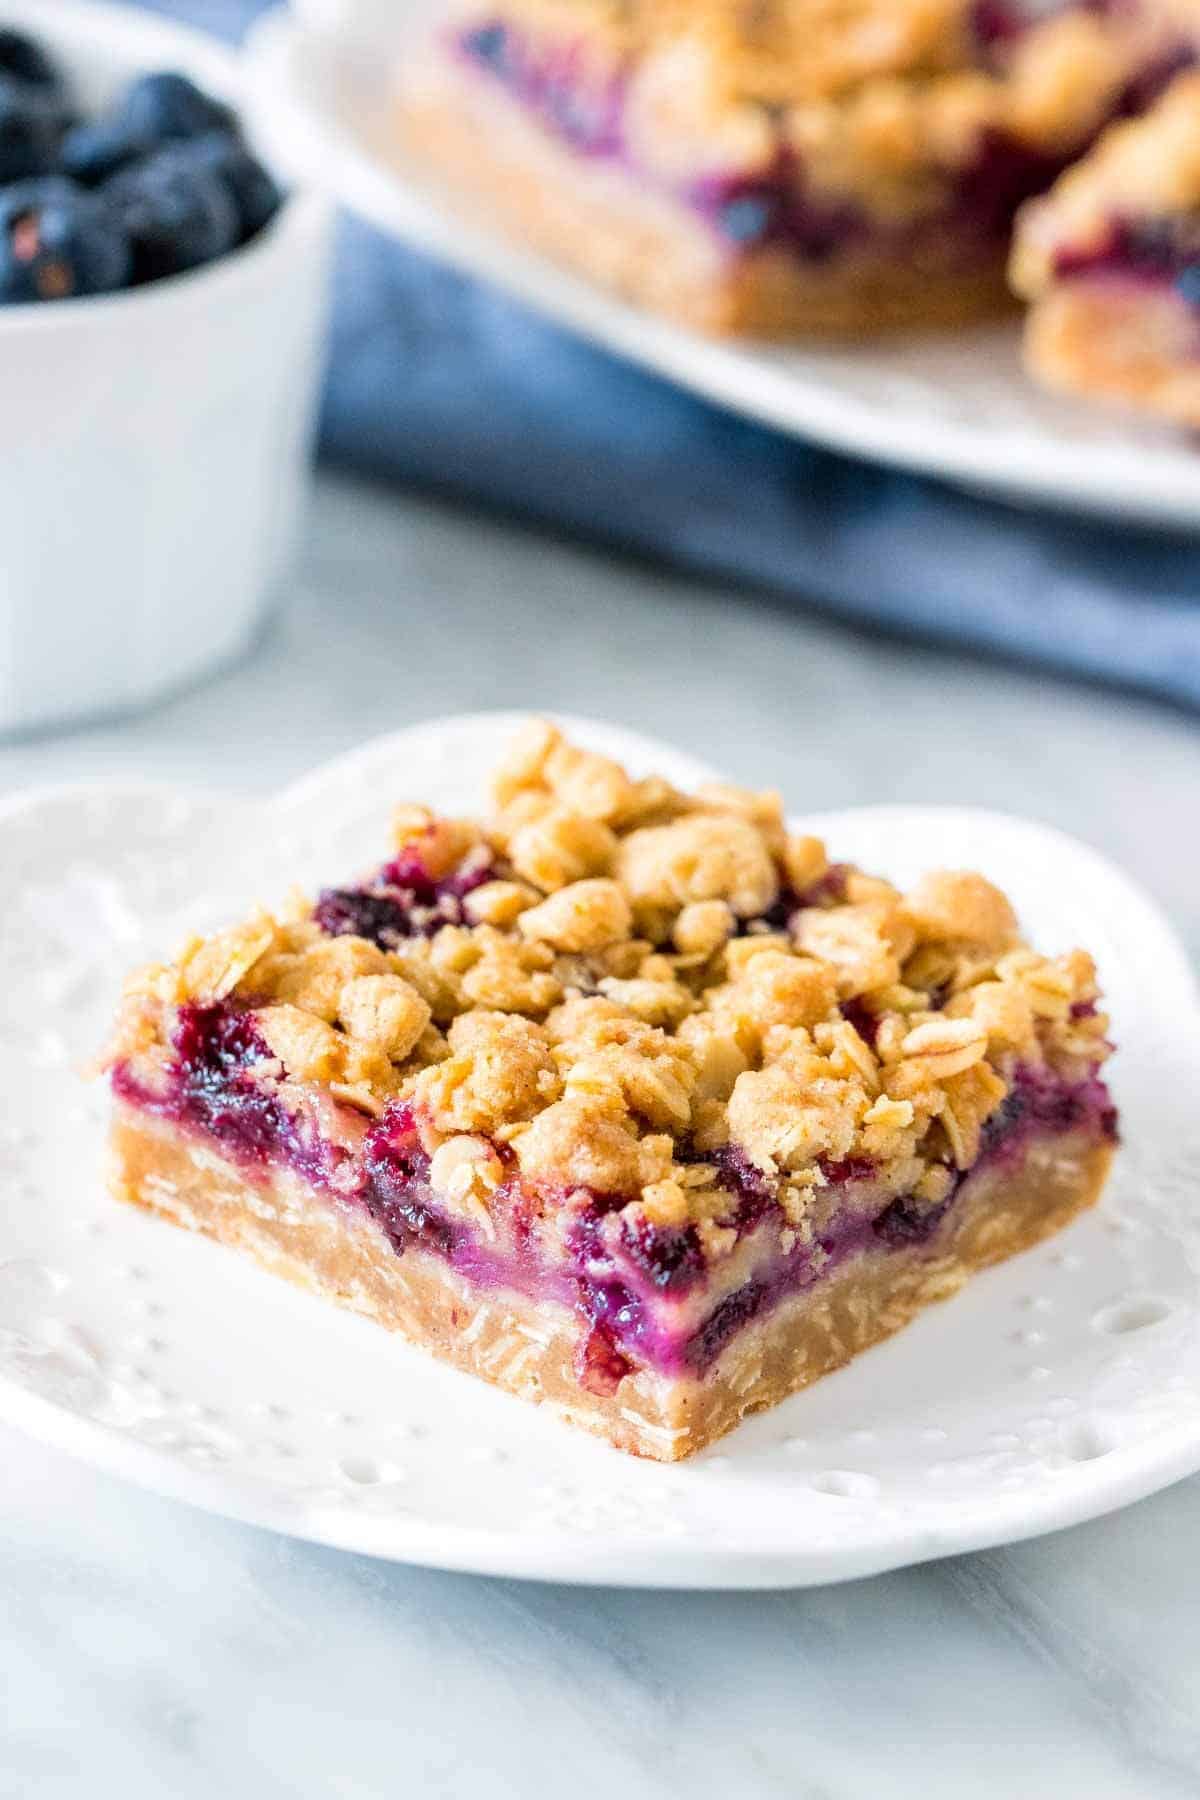 Slice of blueberry oatmeal crumble bar on a plate with bowl of berries. 